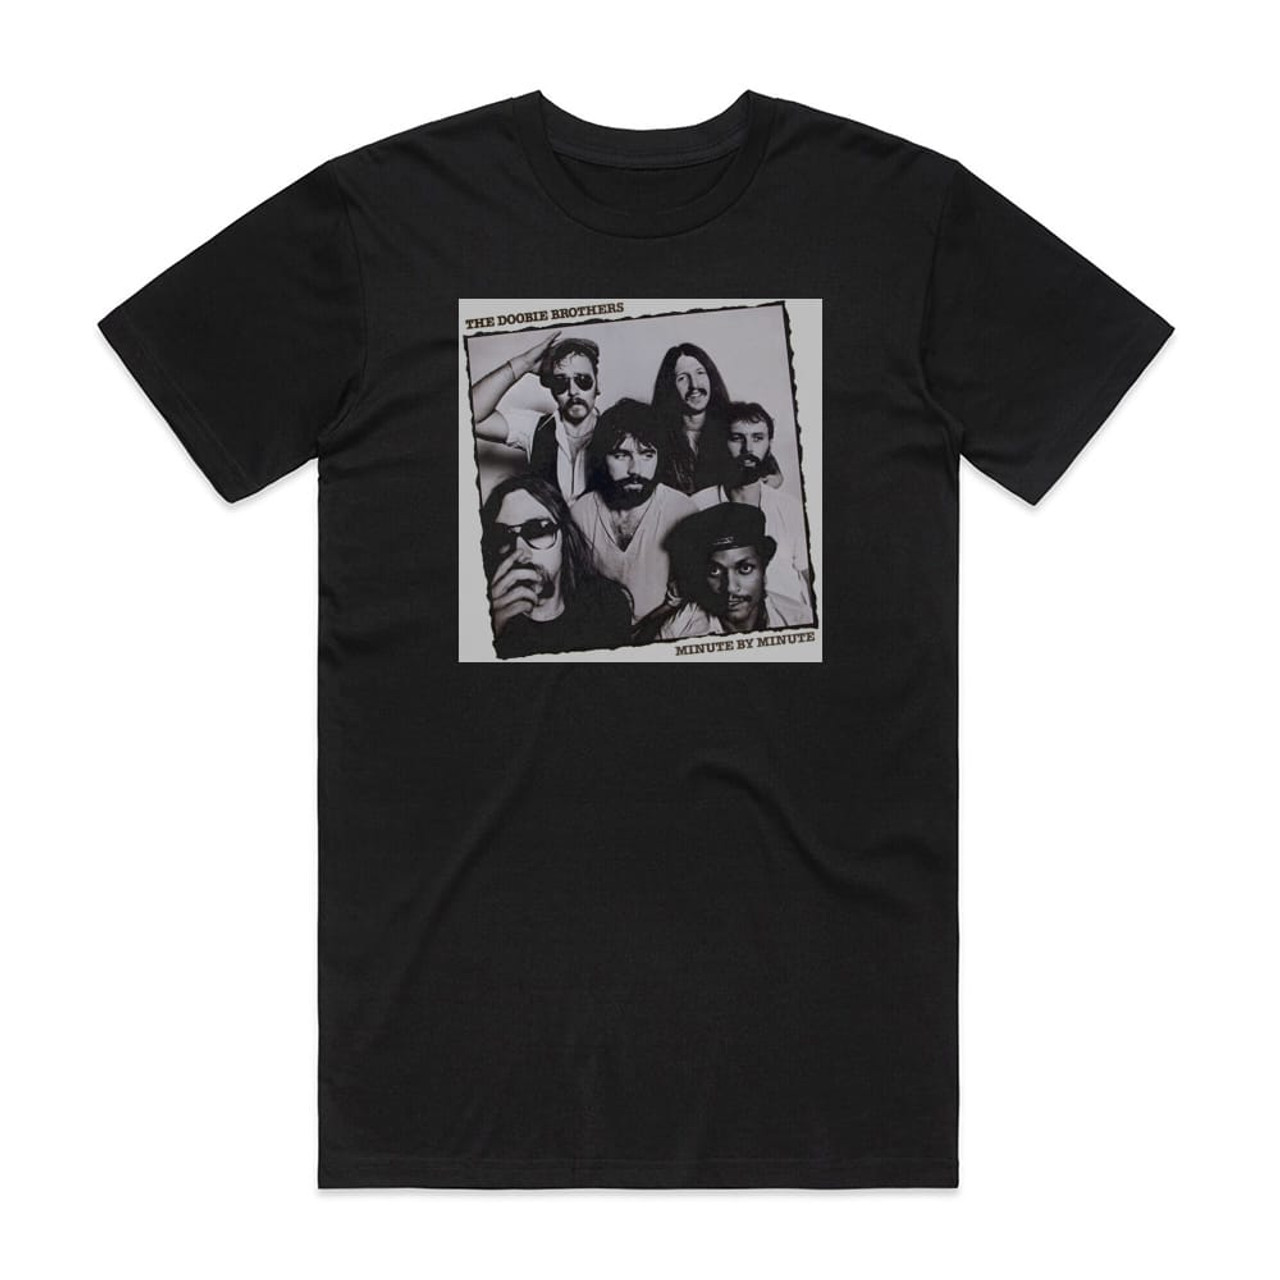 The Doobie Brothers Minute By Minute Album Cover T-Shirt Black